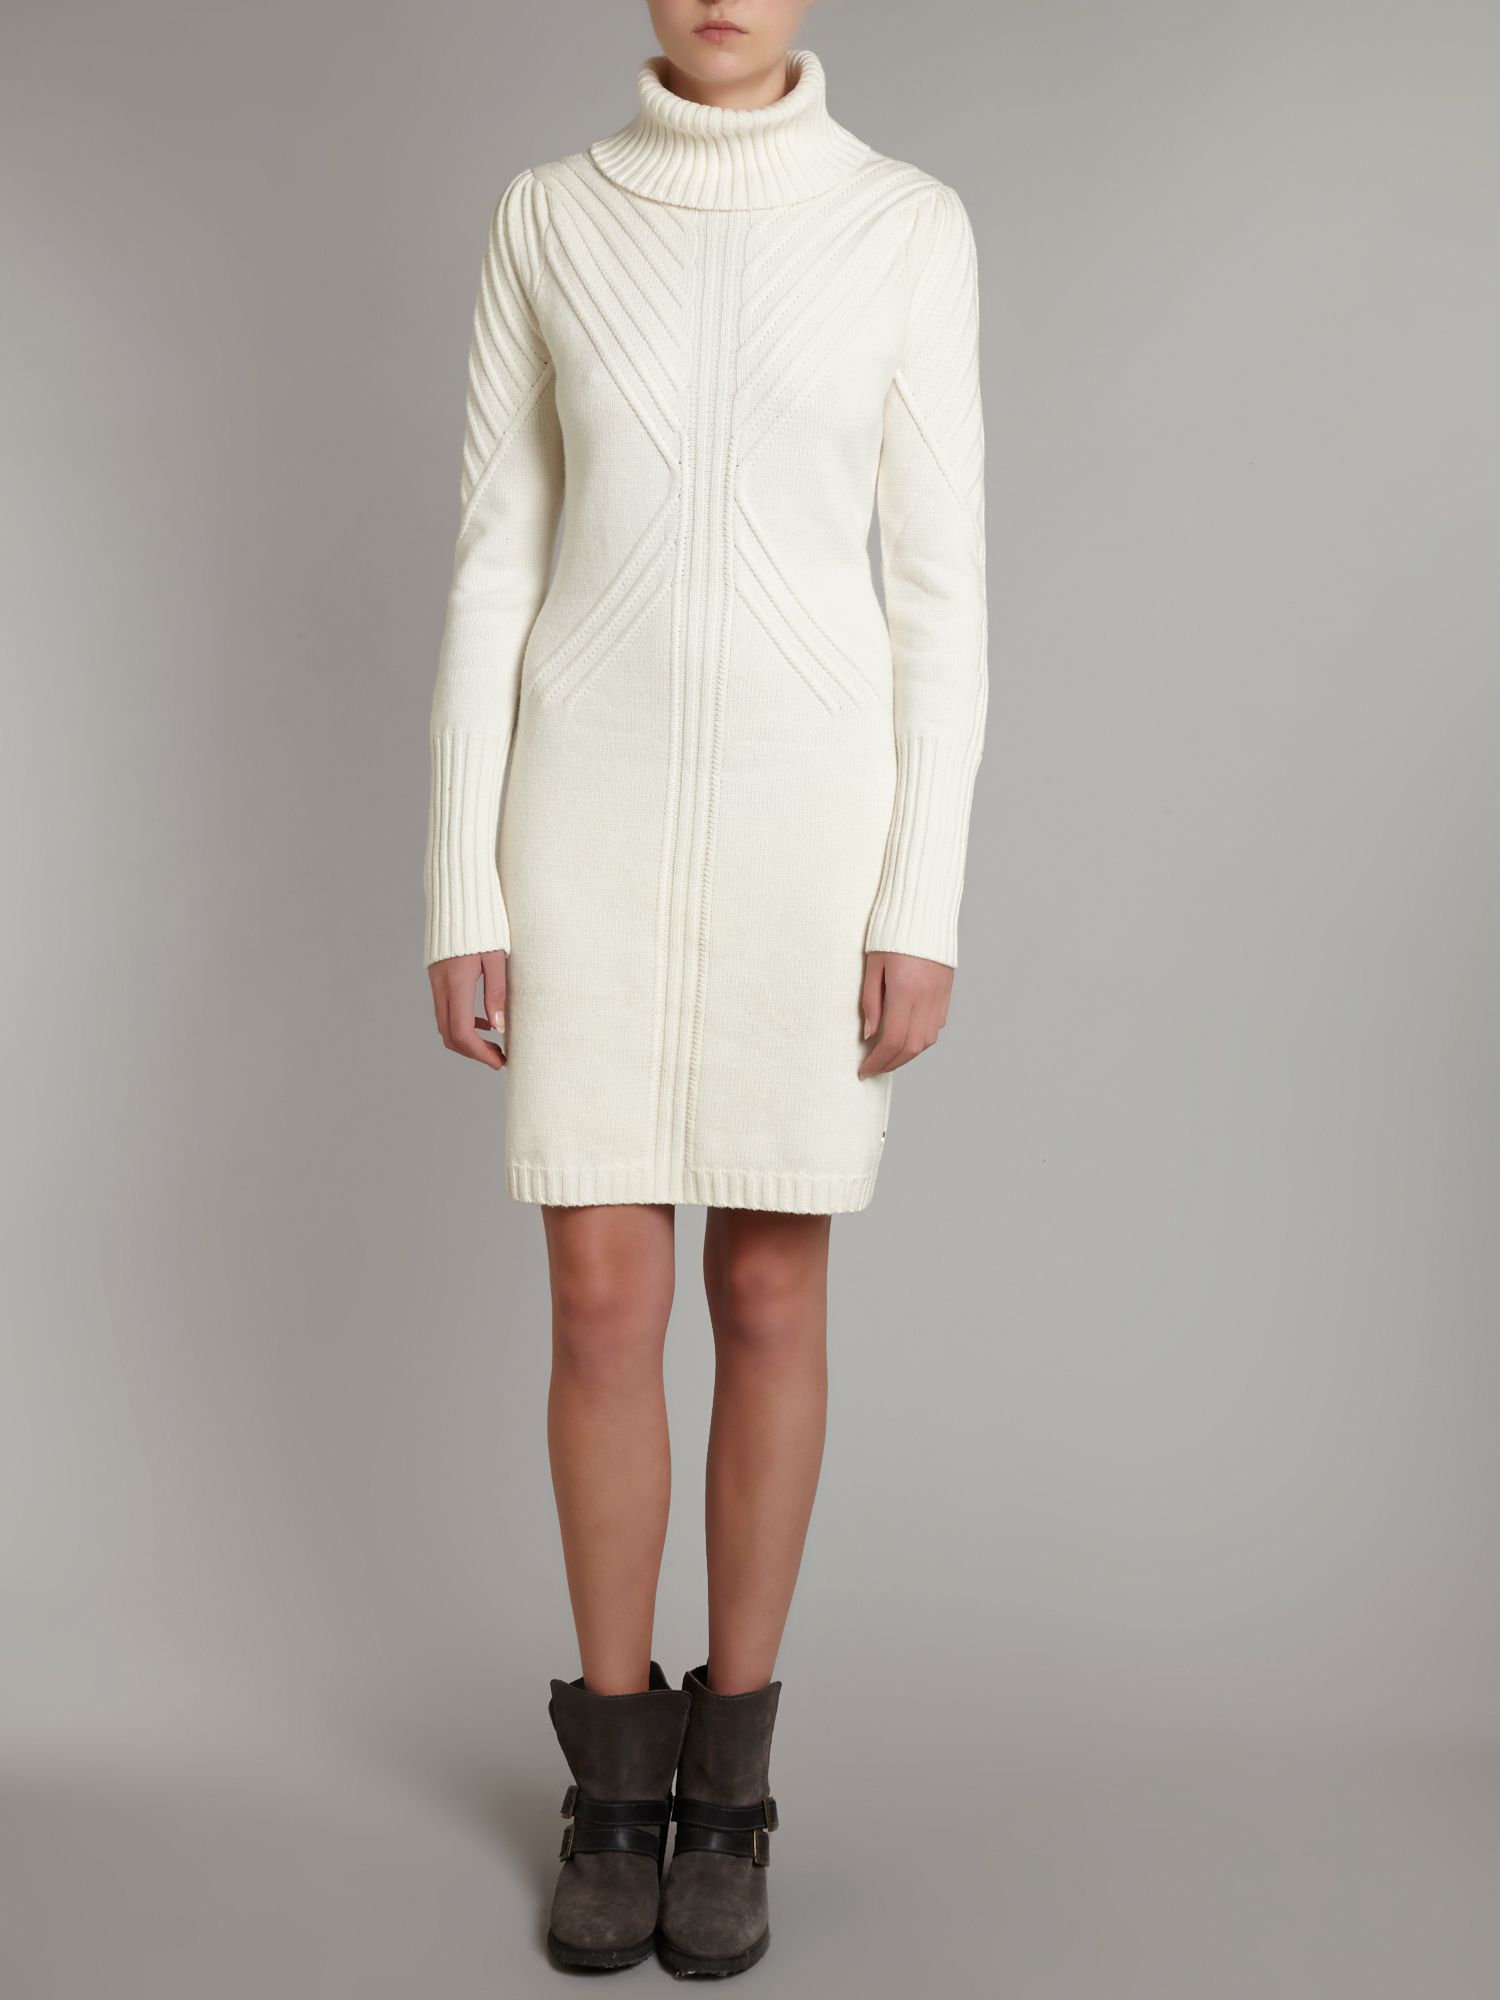 white knit dresses with sleeves